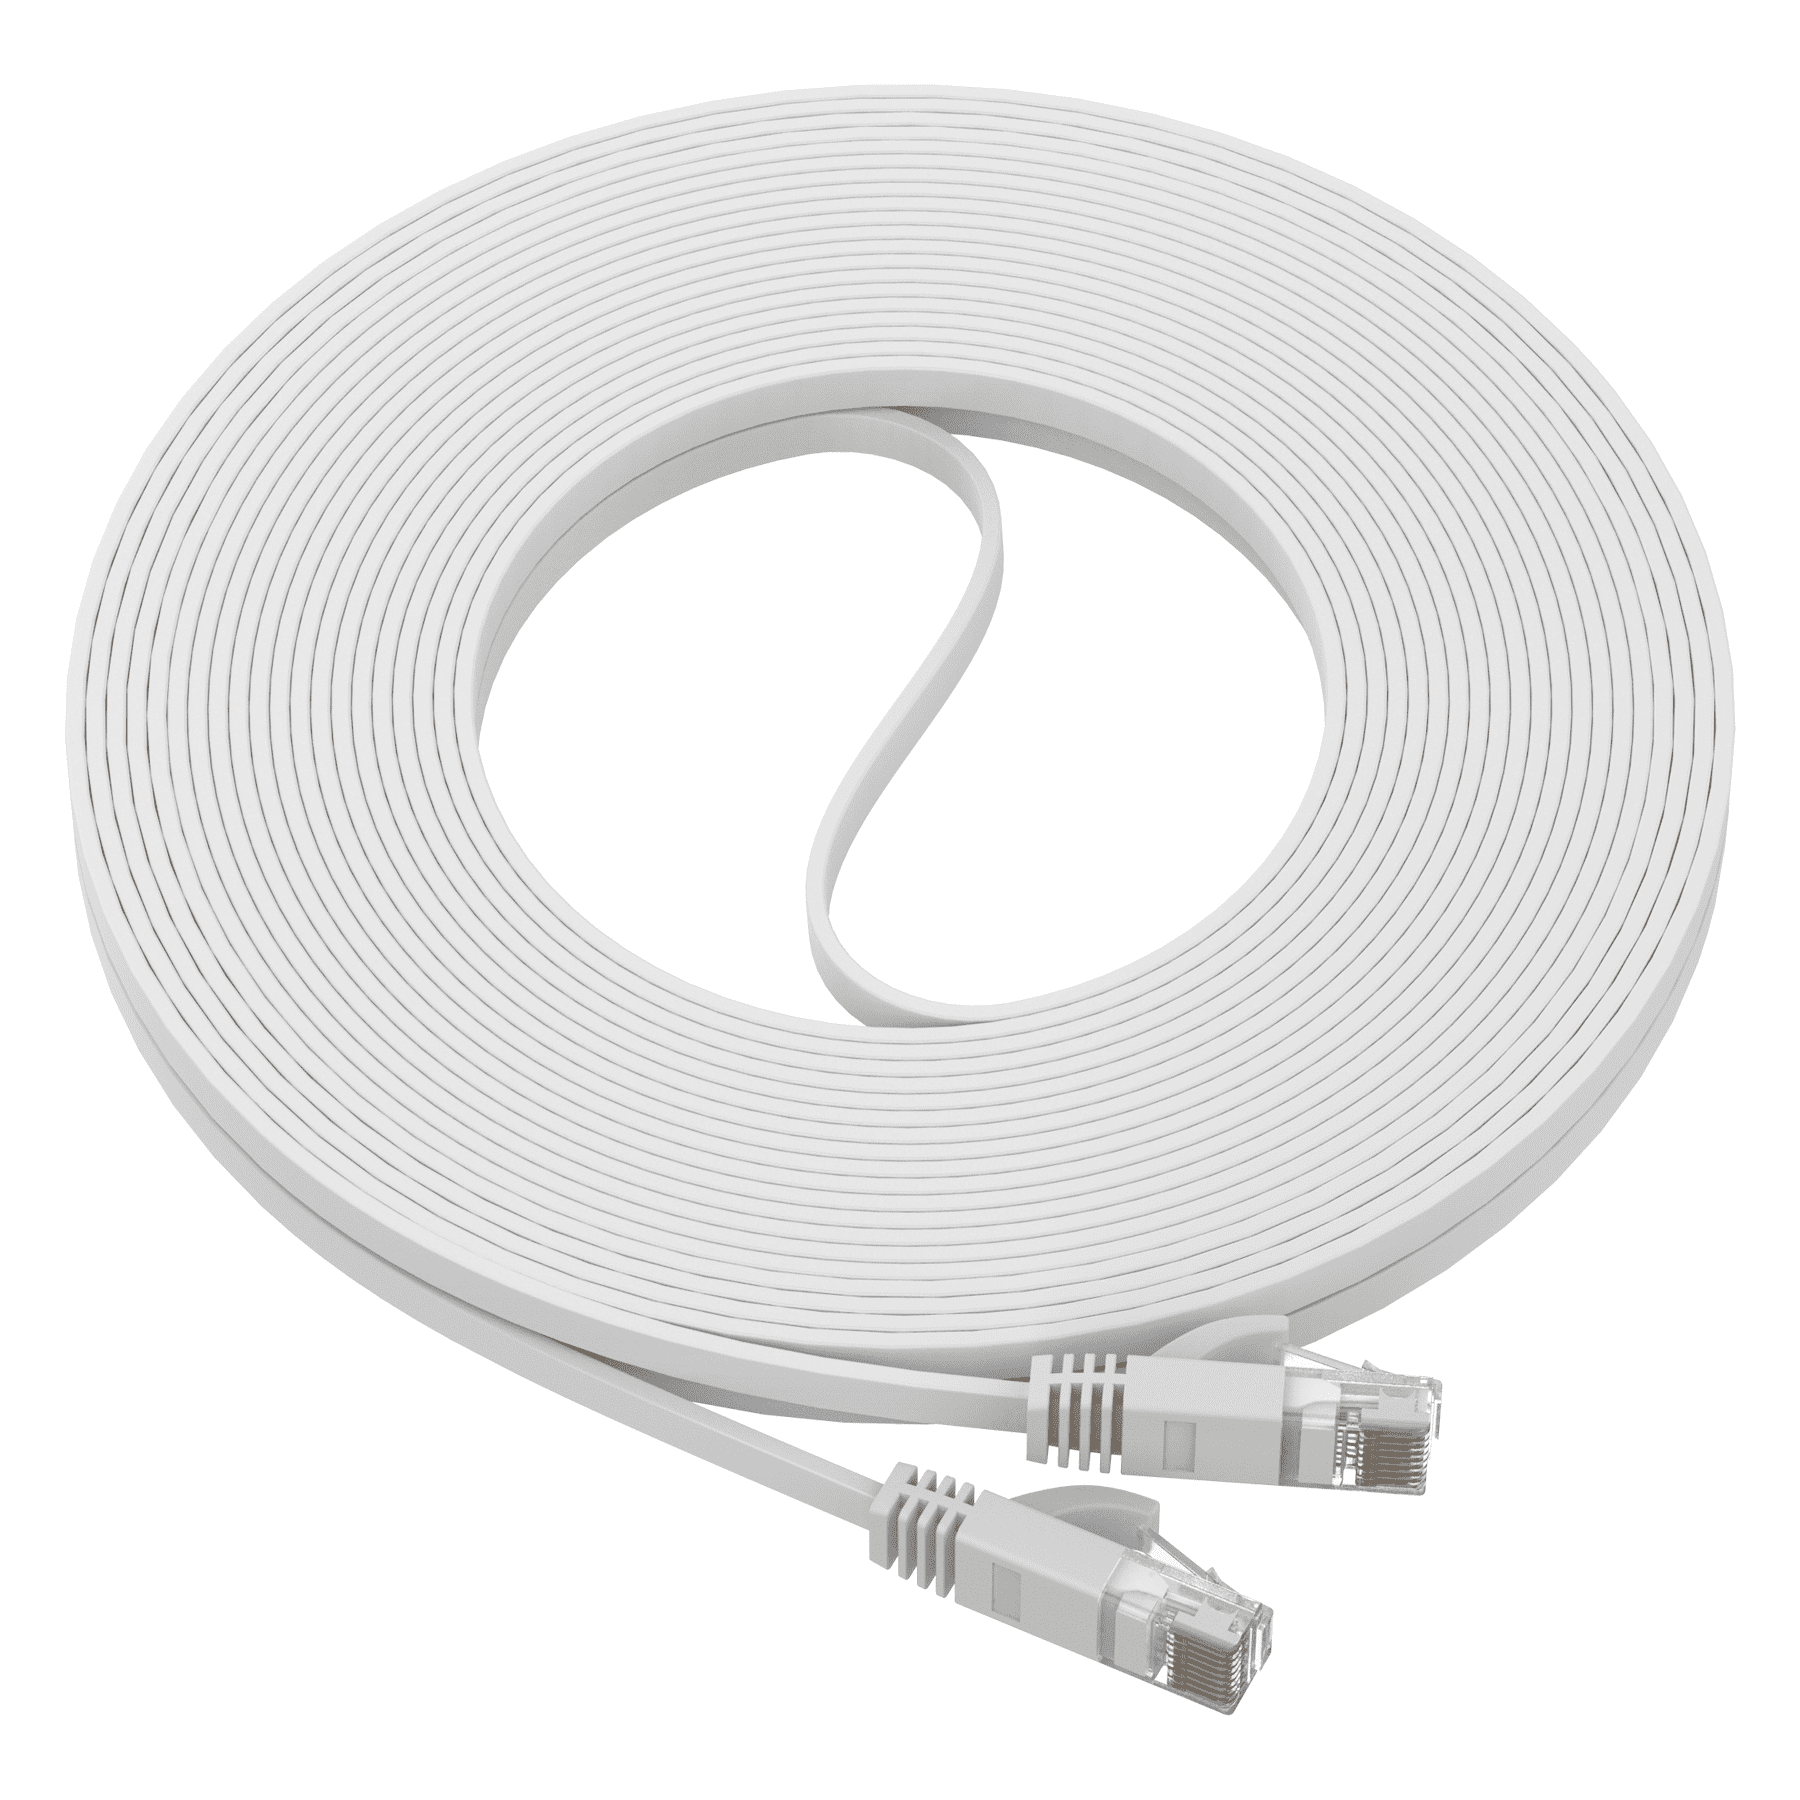 Ultra Clarity Cables Cat6 50 ft Ethernet Cable, RJ45, LAN, utp, Cat 6,  Network, Patch, Internet Cable - 50 Feet